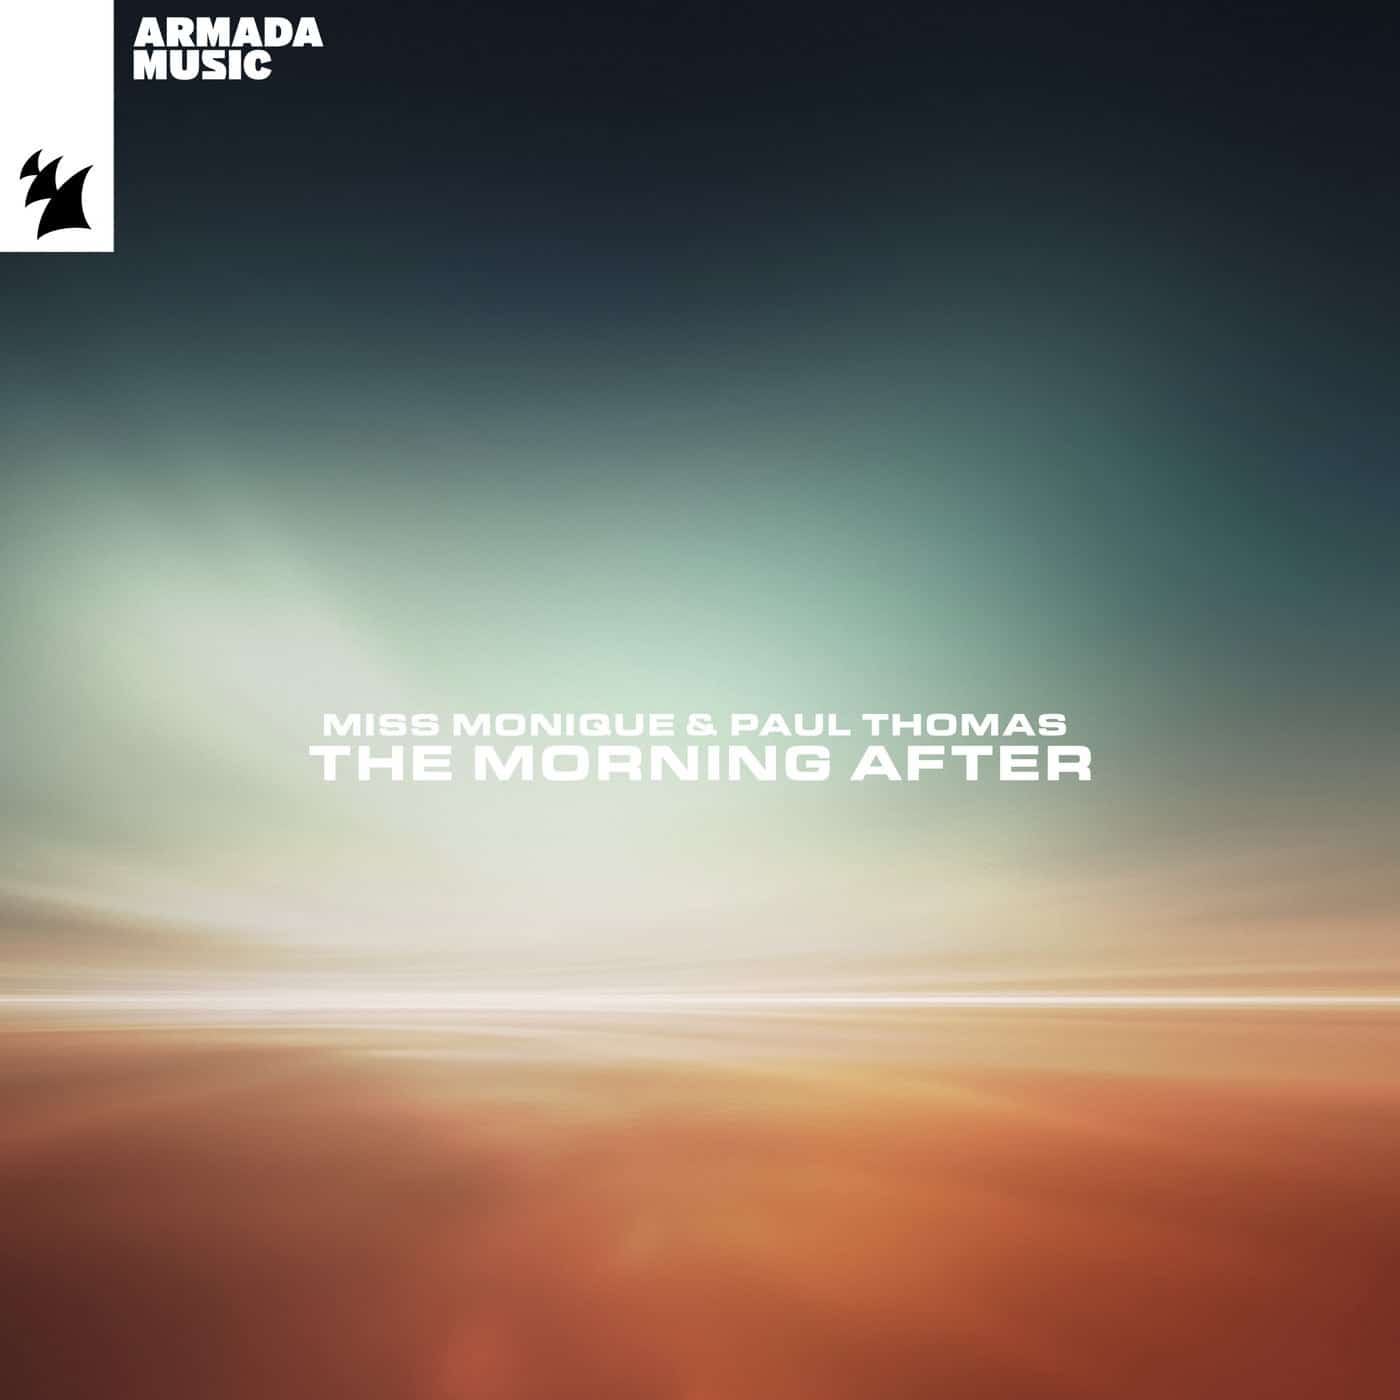 image cover: Paul Thomas, Miss Monique - The Morning After on Armada Music